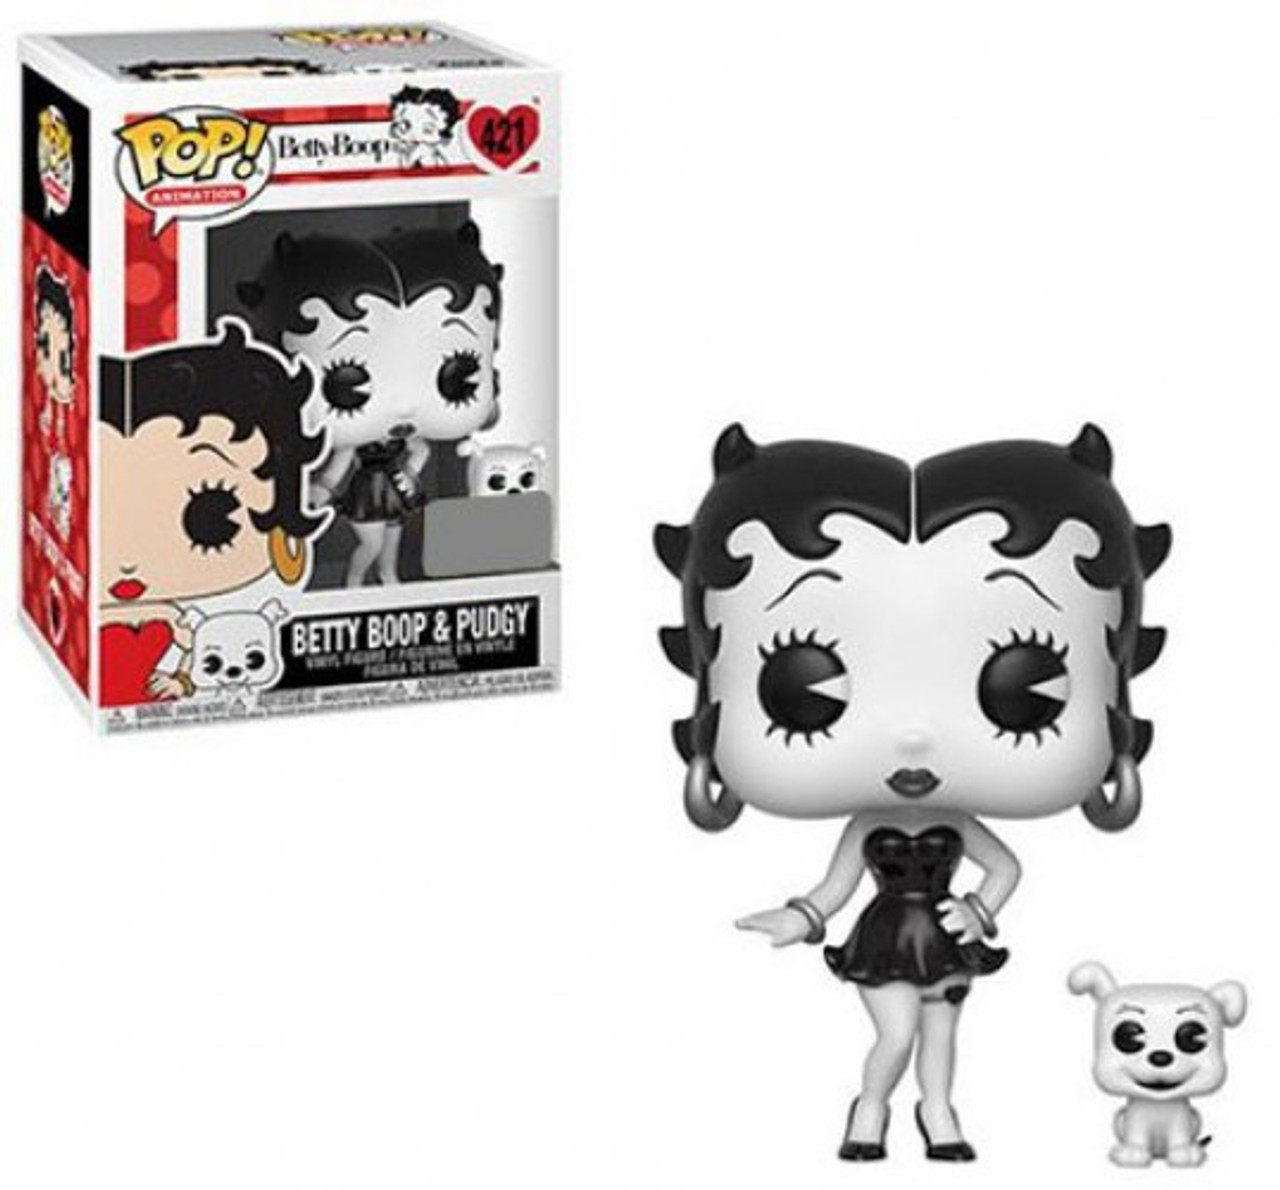 Funko Betty Boop Pop Animation Betty Boop Pudgy Exclusive Vinyl Figure 421 Black White Damaged Package Toywiz - 20 roblox naruto hat hair pictures and ideas on weric